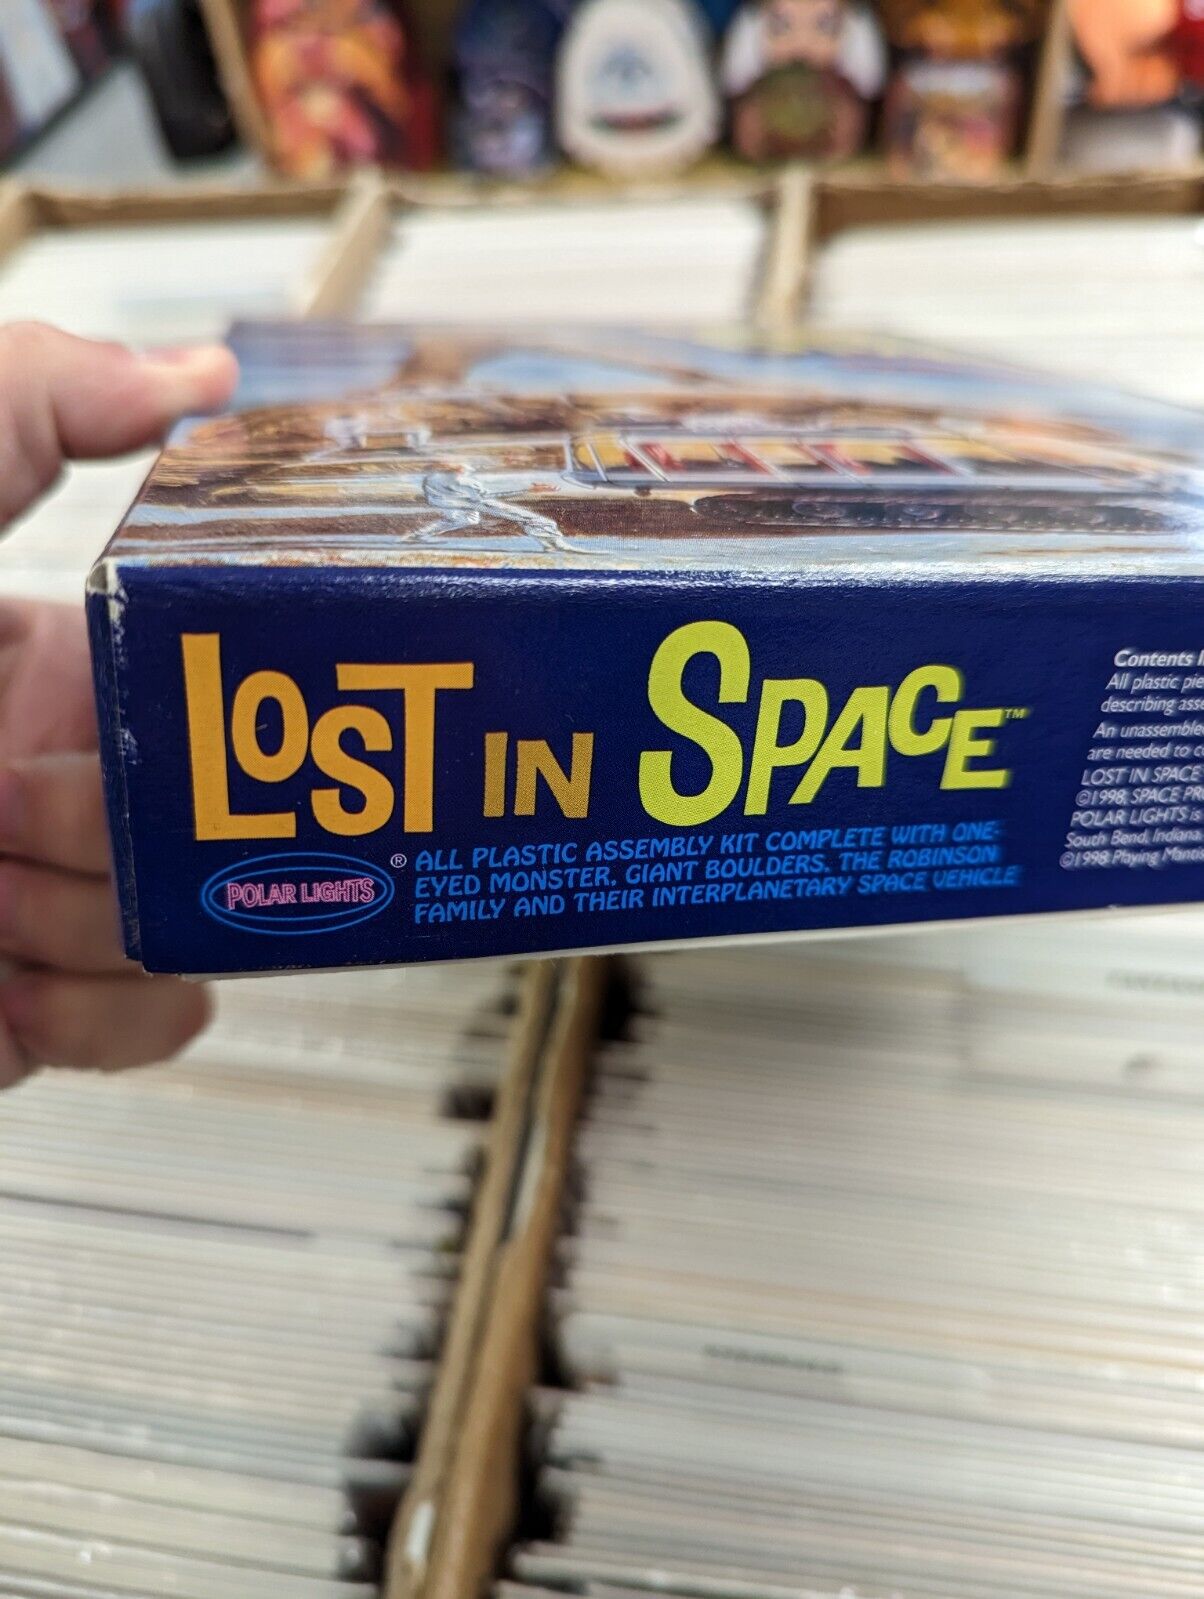 Polar Lights Lost In Space All Plastic Assembly Kit 1998